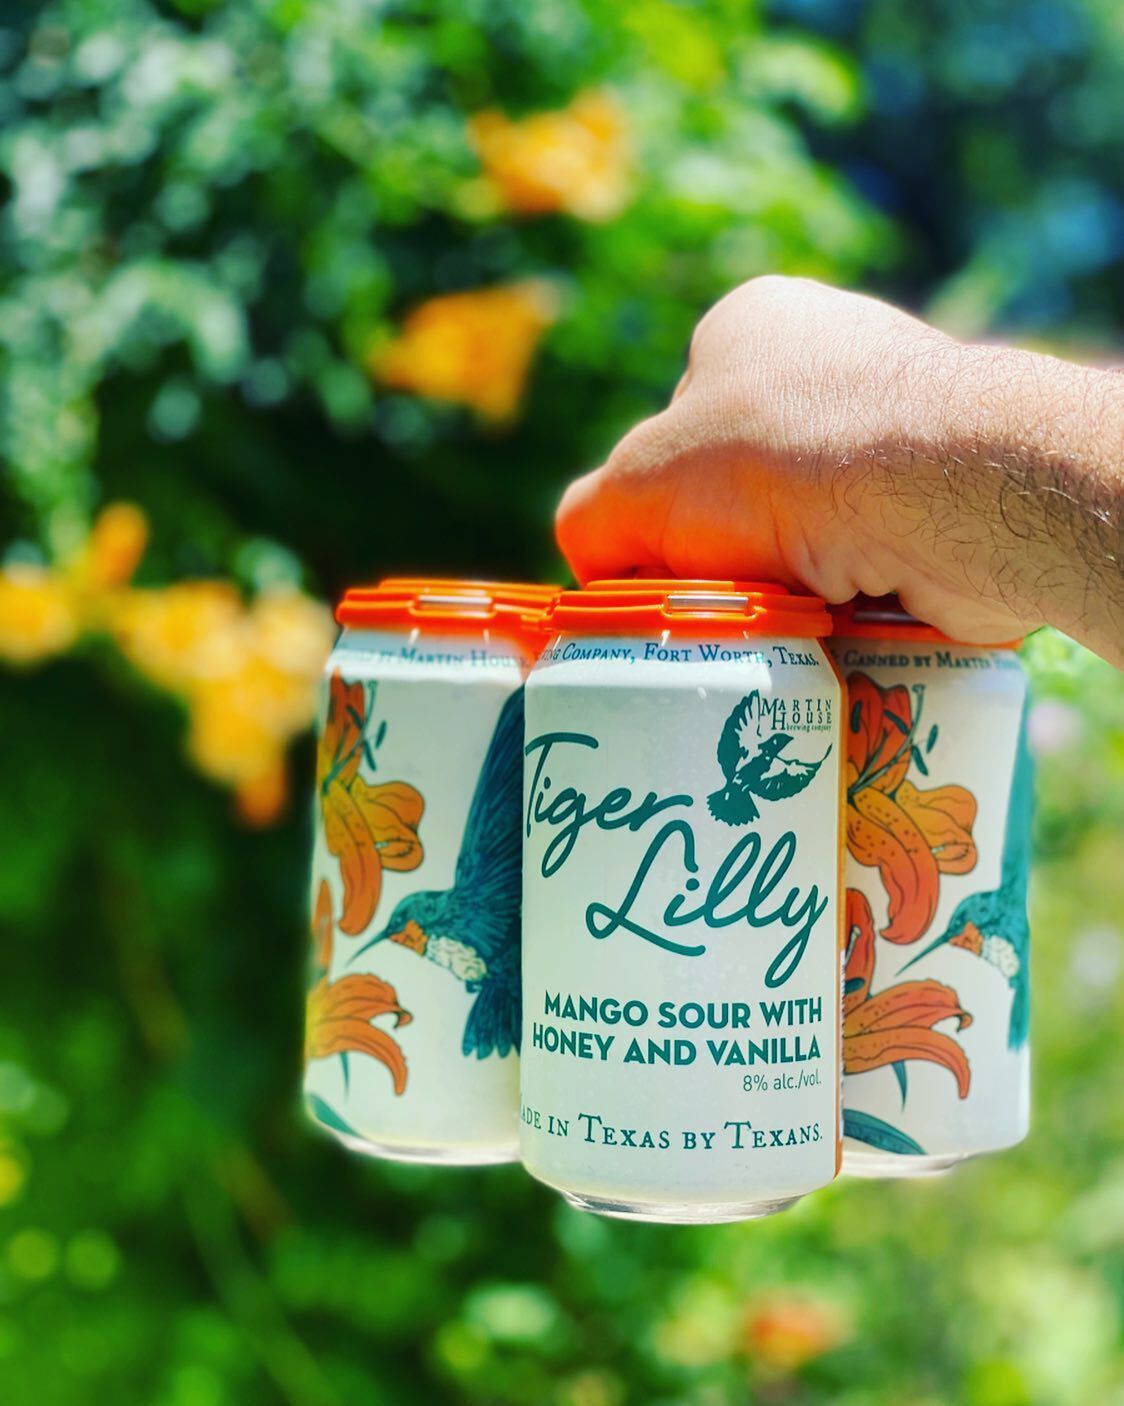 Martin House Brewing's Tiger Lilly mango sour